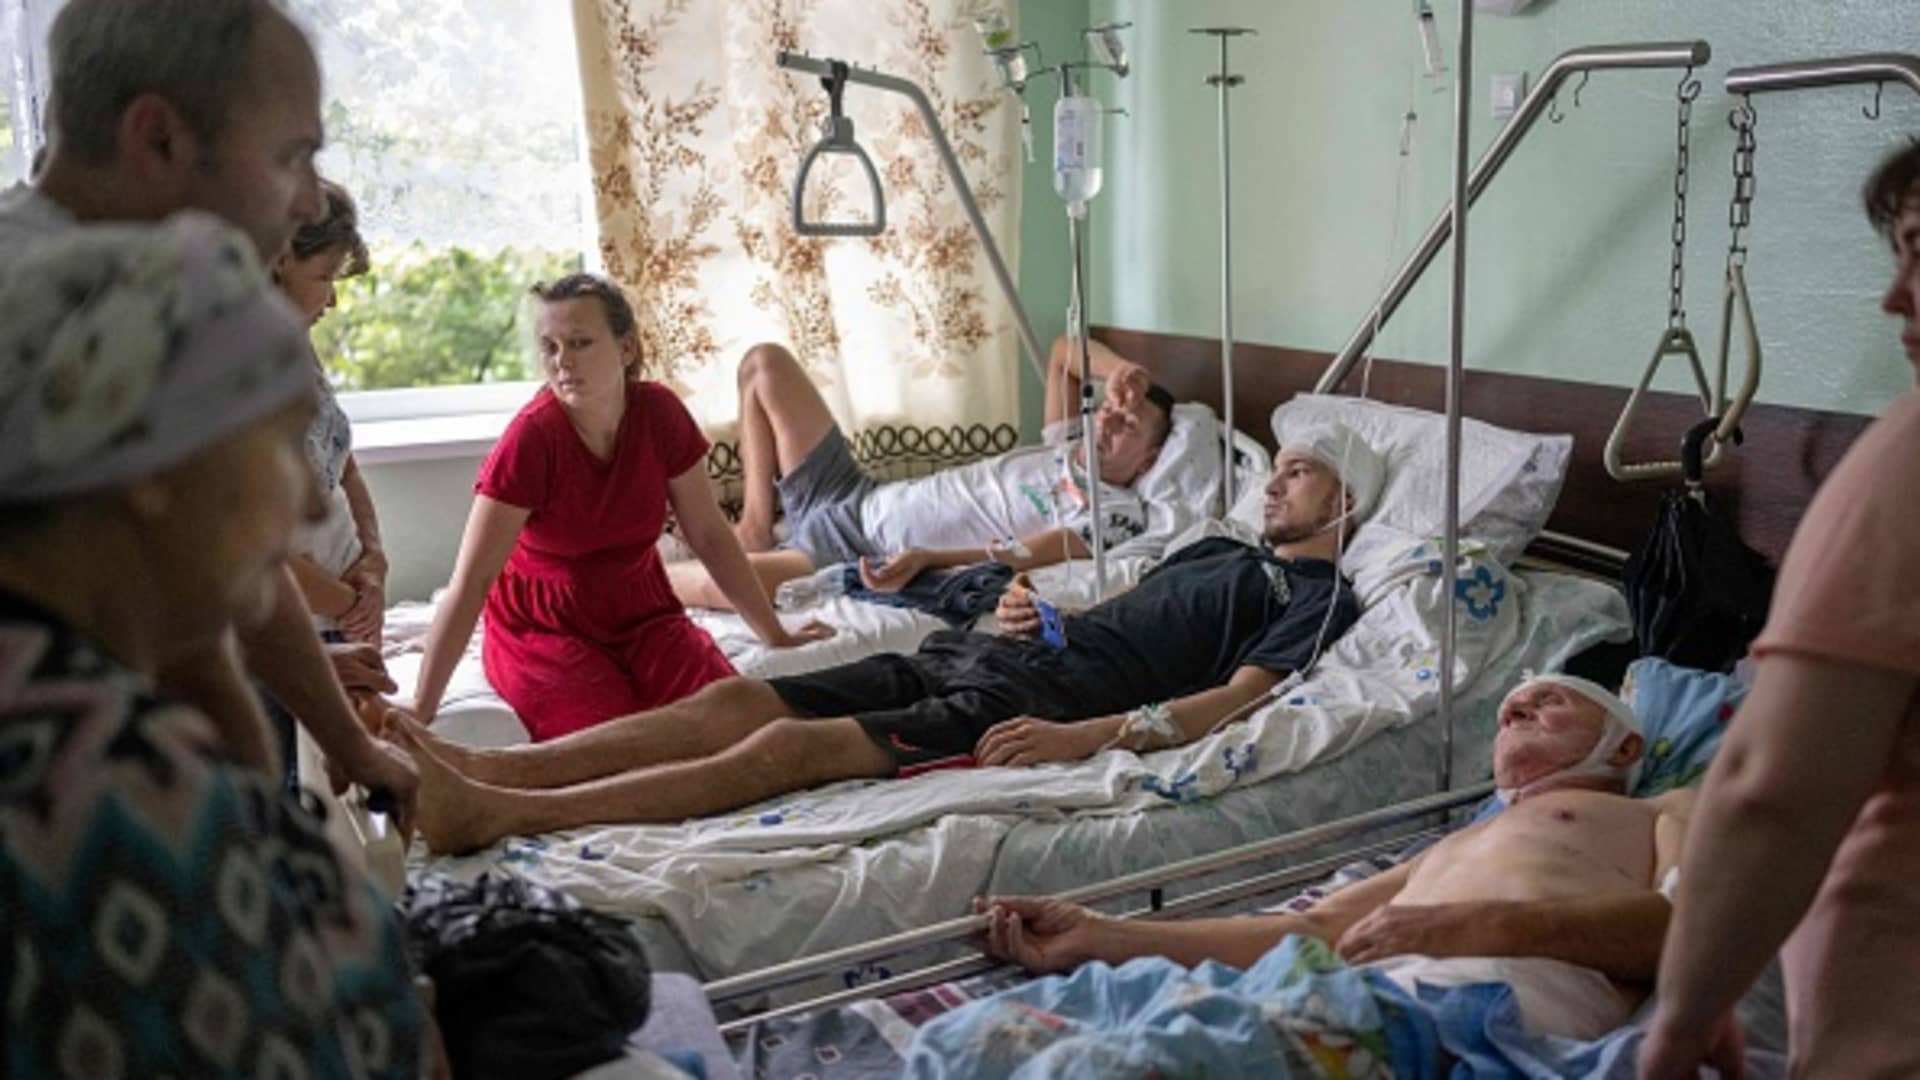 Relatives gather in a hospital around three men injured in a missile strike in Mykolaiv, on Aug. 18, 2022, amid the Russian invasion of Ukraine.